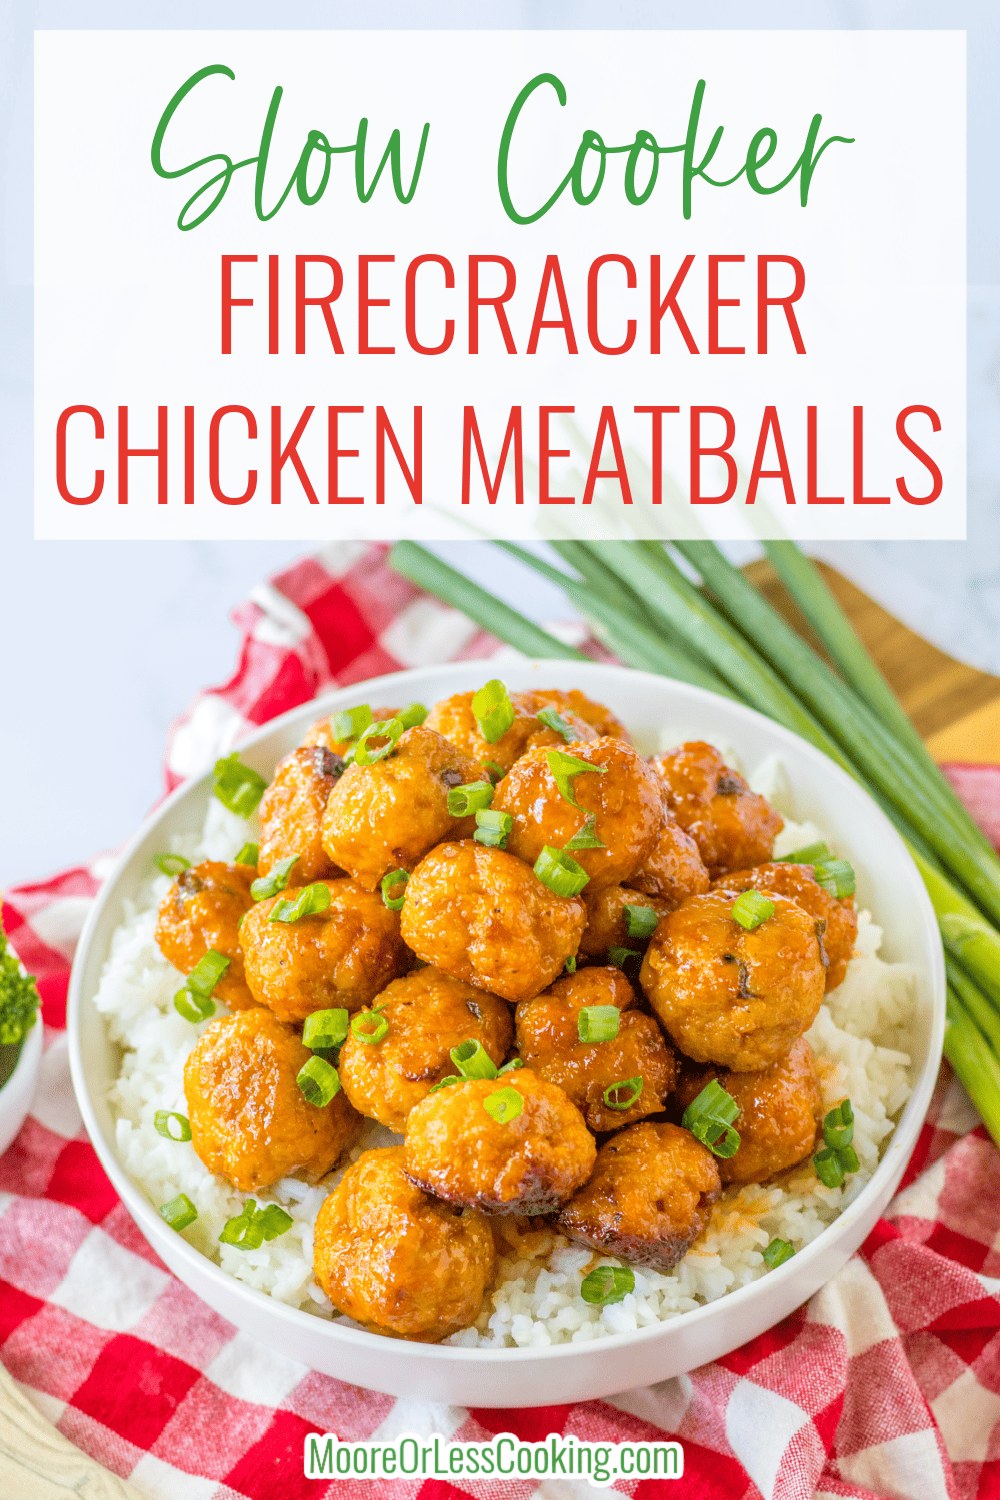 Tender and outrageously flavorful, these Slow Cooker Firecracker Chicken Meatballs are cooked to succulent deliciousness in just a few hours. They're an easy and versatile recipe for a main meal or to serve as an appetizer. via @Mooreorlesscook